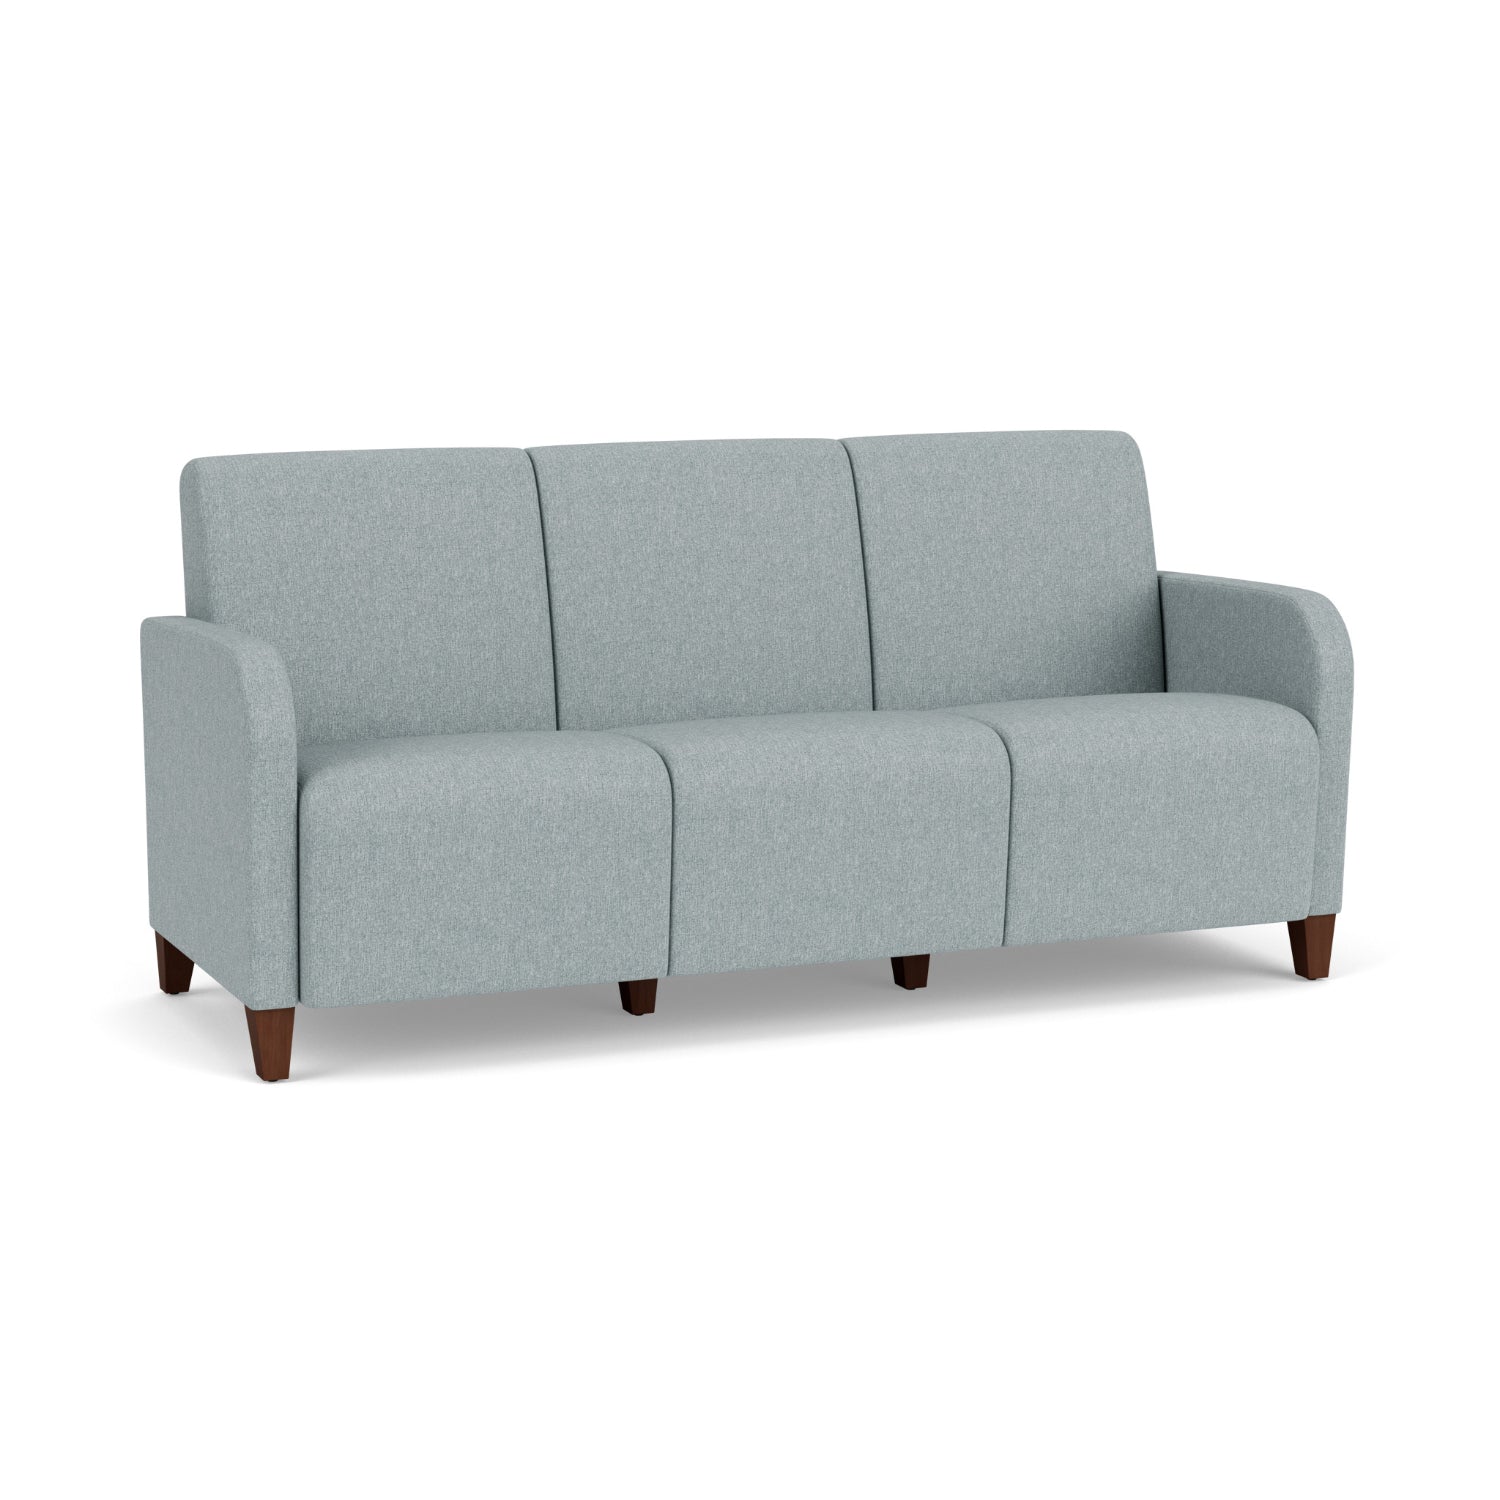 Siena Collection Reception Seating, 3-Seat Sofa, Healthcare Vinyl Upholstery, FREE SHIPPING